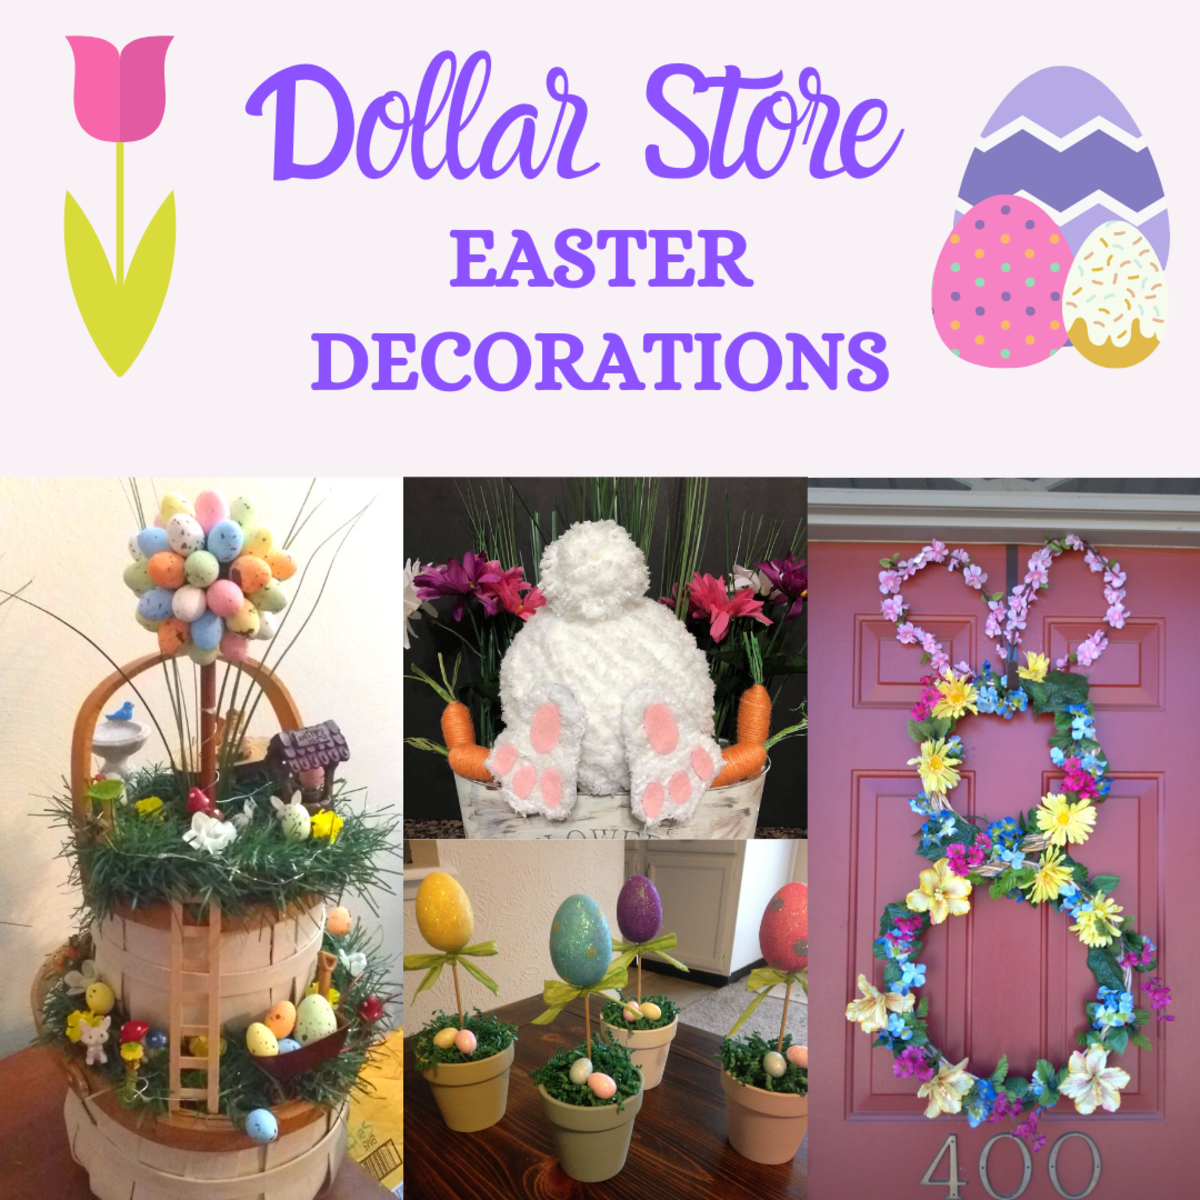 40 + DIY Dollar Store Easter Decorations that are so Egg-citing to make